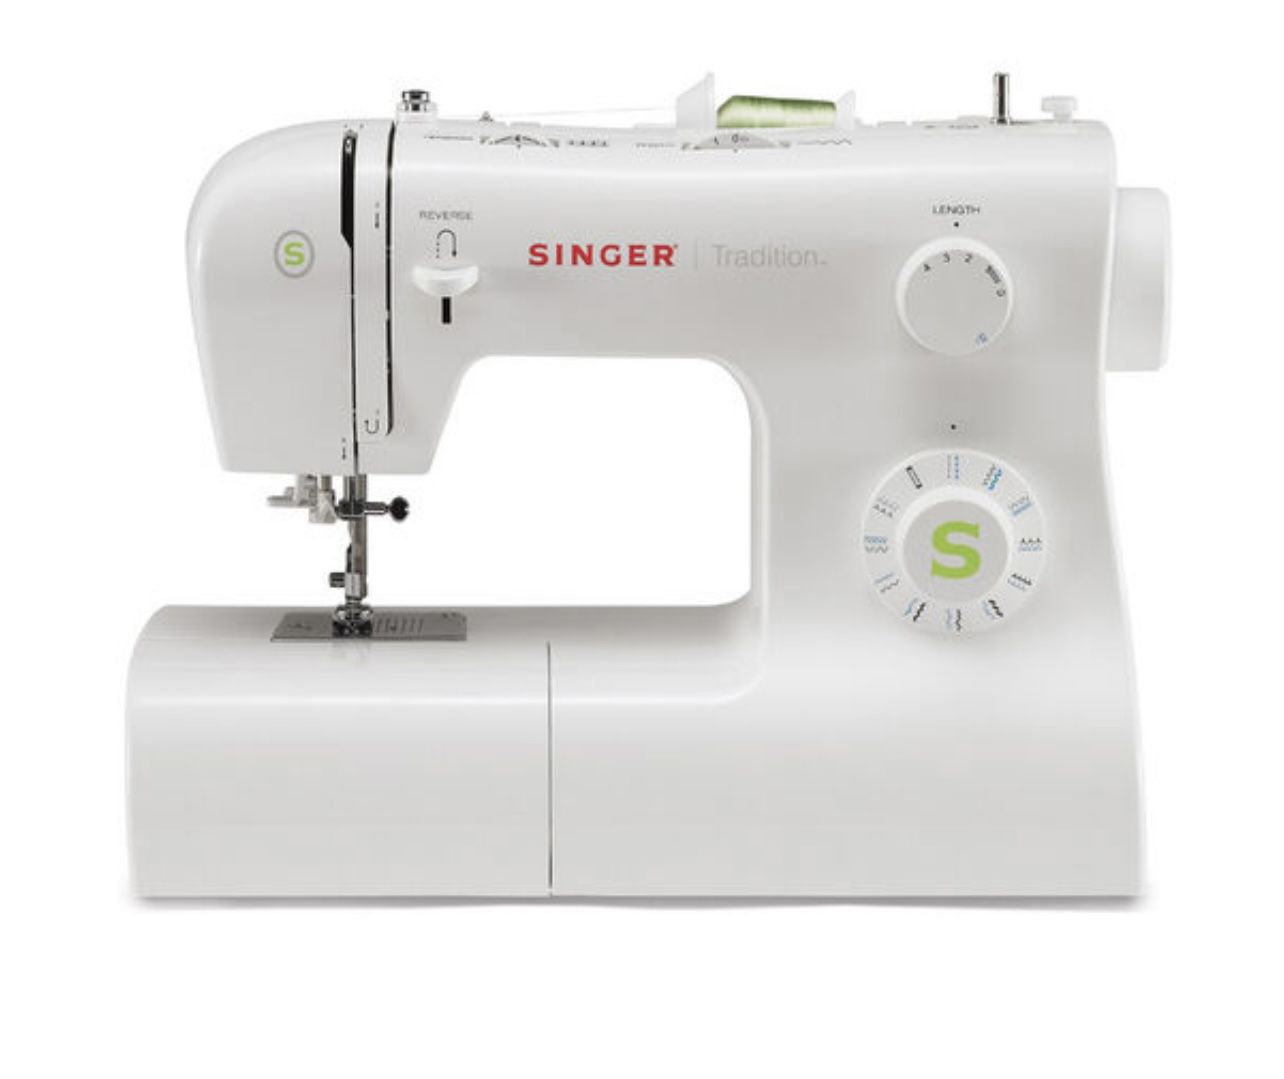 Singer tradition Sewing Machine